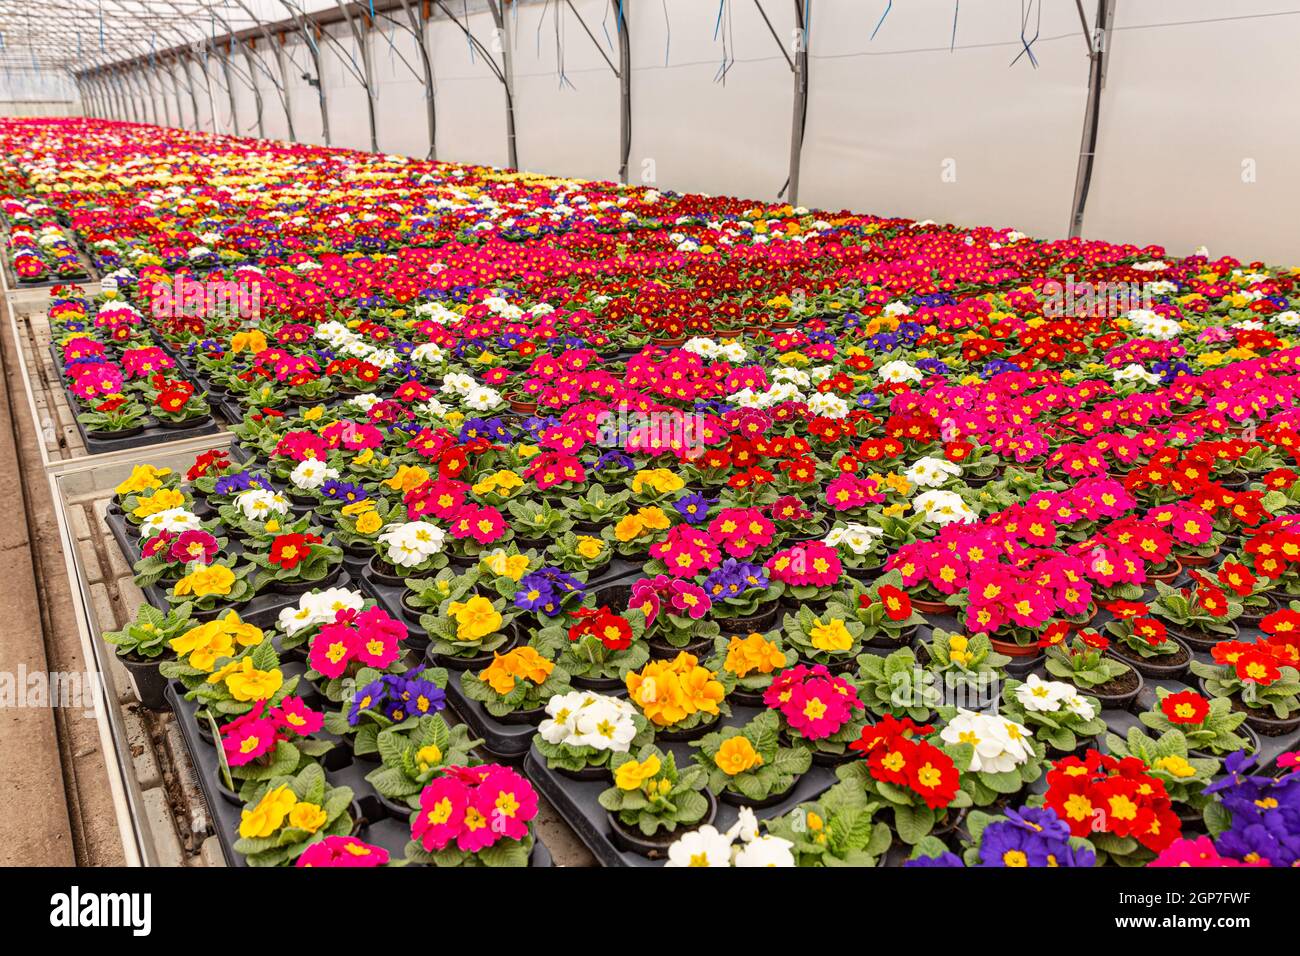 Colorful small potted flowers Primula Auricula blooming in the rows in greenhouse Stock Photo